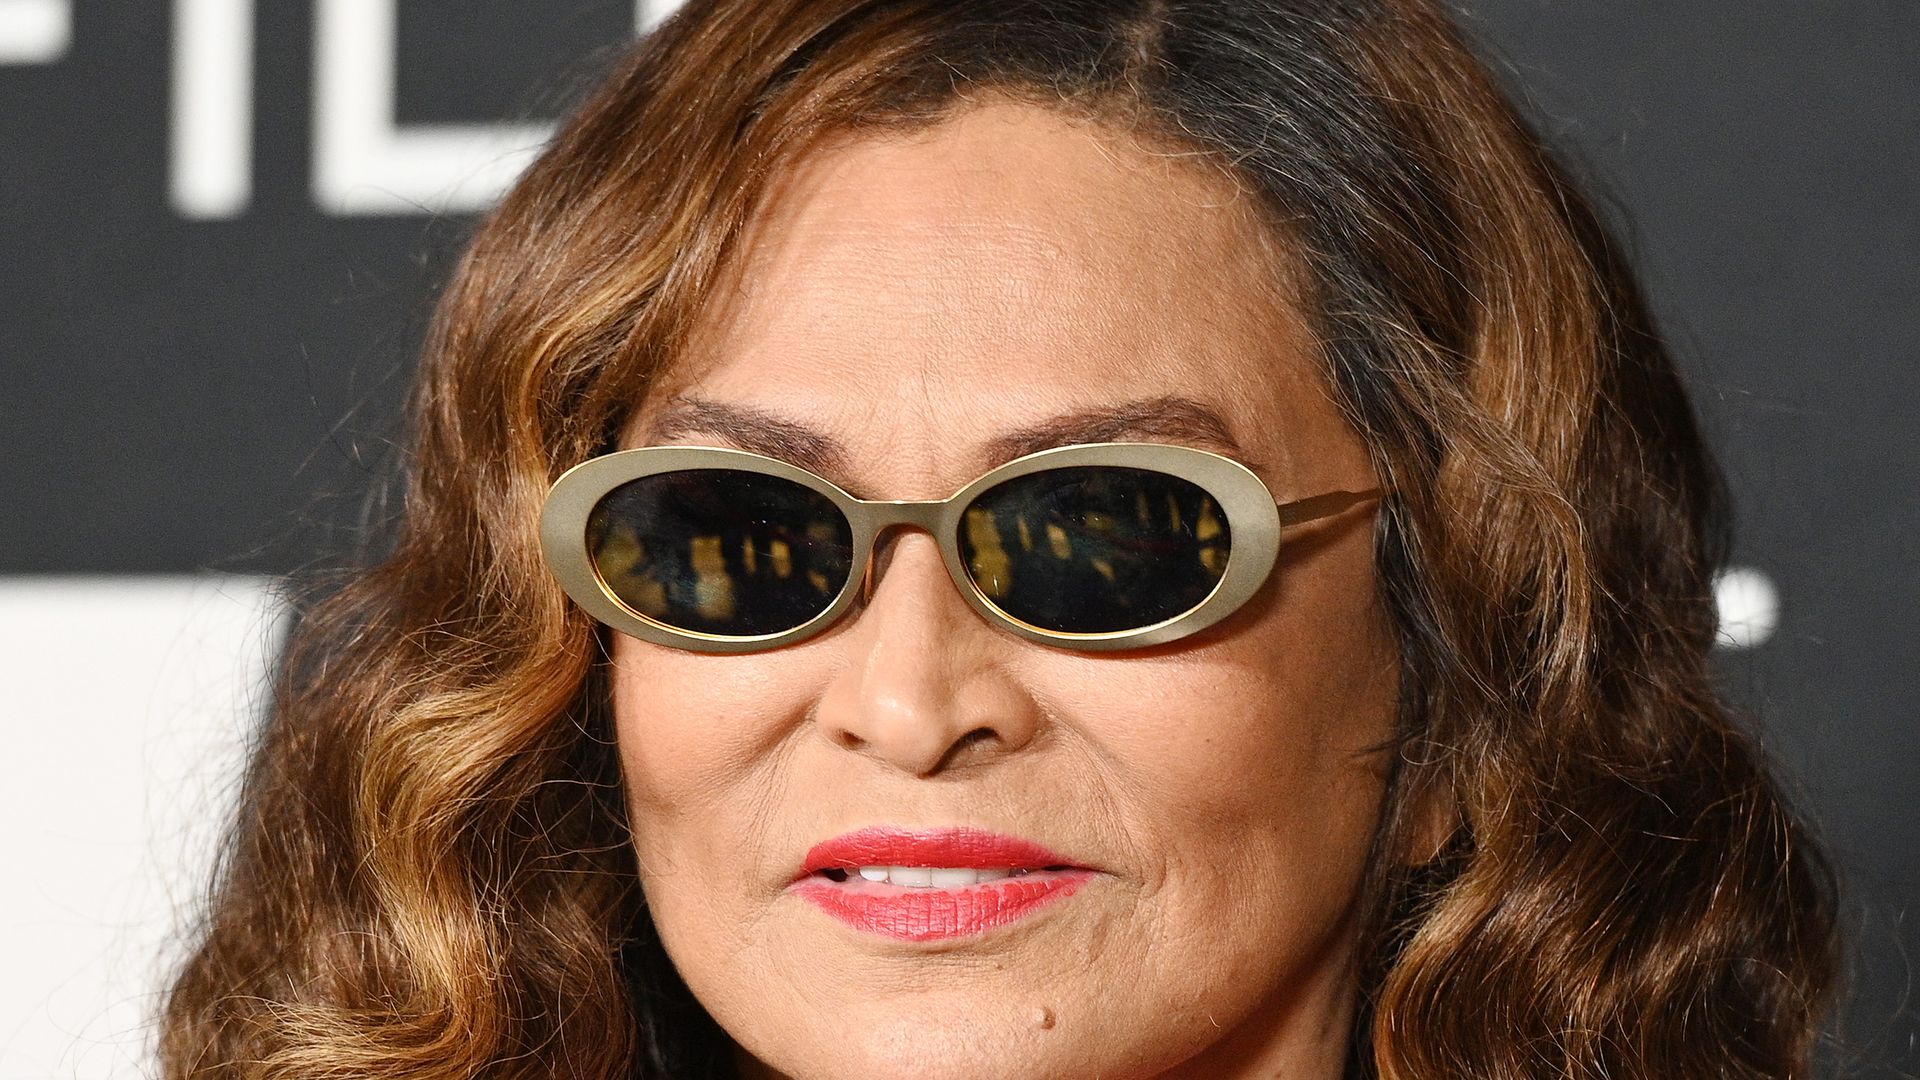 Beyonce's Mother, Tina Knowles, falls victim to Los Angeles home burglary - report